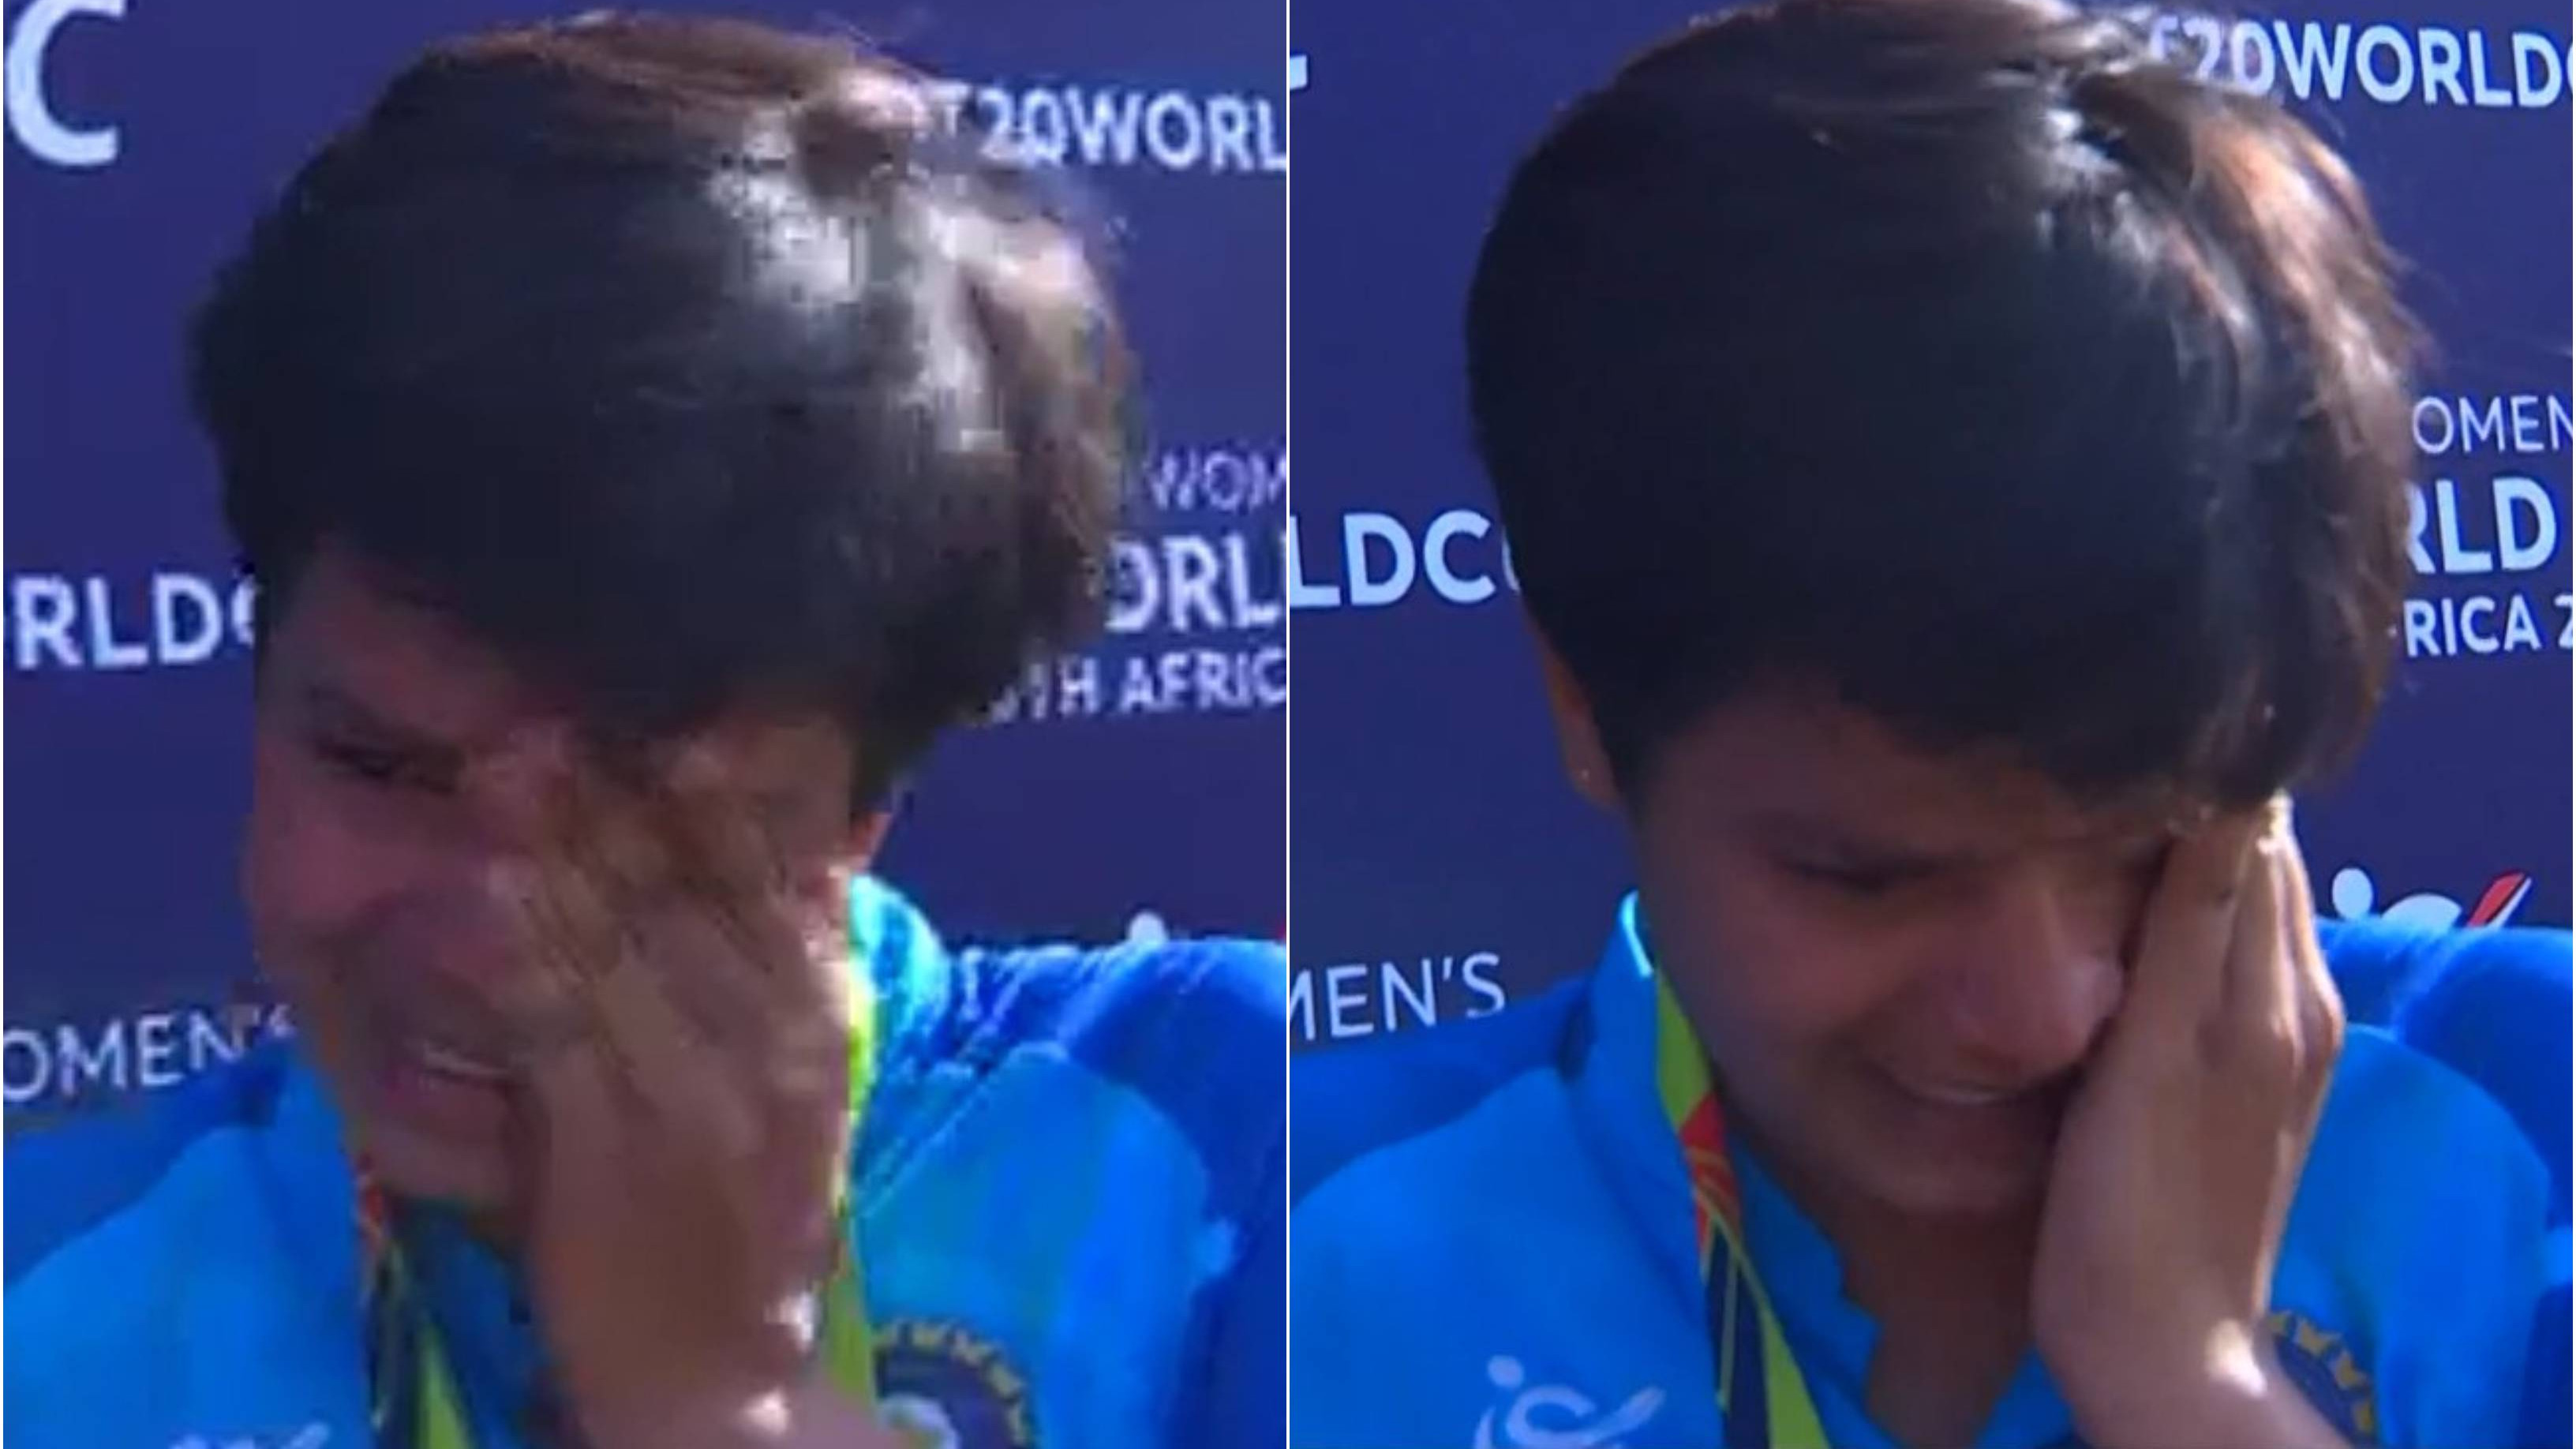 WATCH: Shafali Verma breaks down in tears after leading India to inaugural ICC Women's U-19 T20 World Cup title